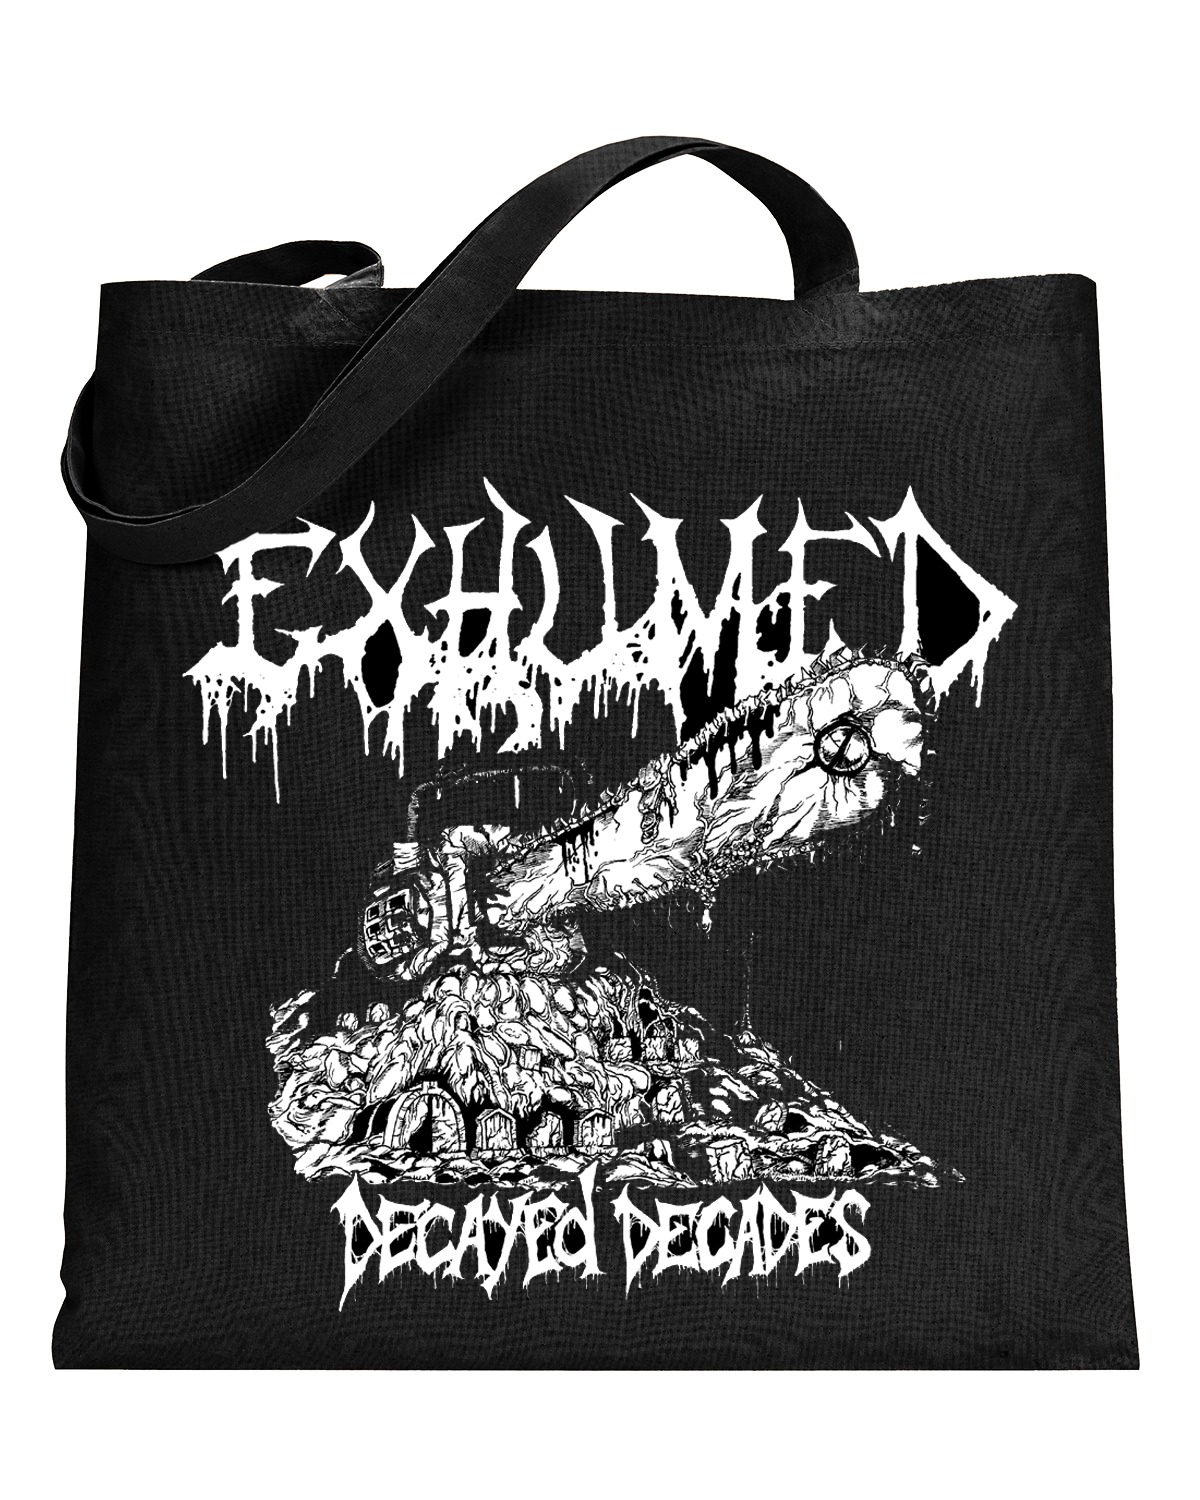 EXHUMED "Decayed Decades" Gore Metal Maniac VIP Meet & Greet